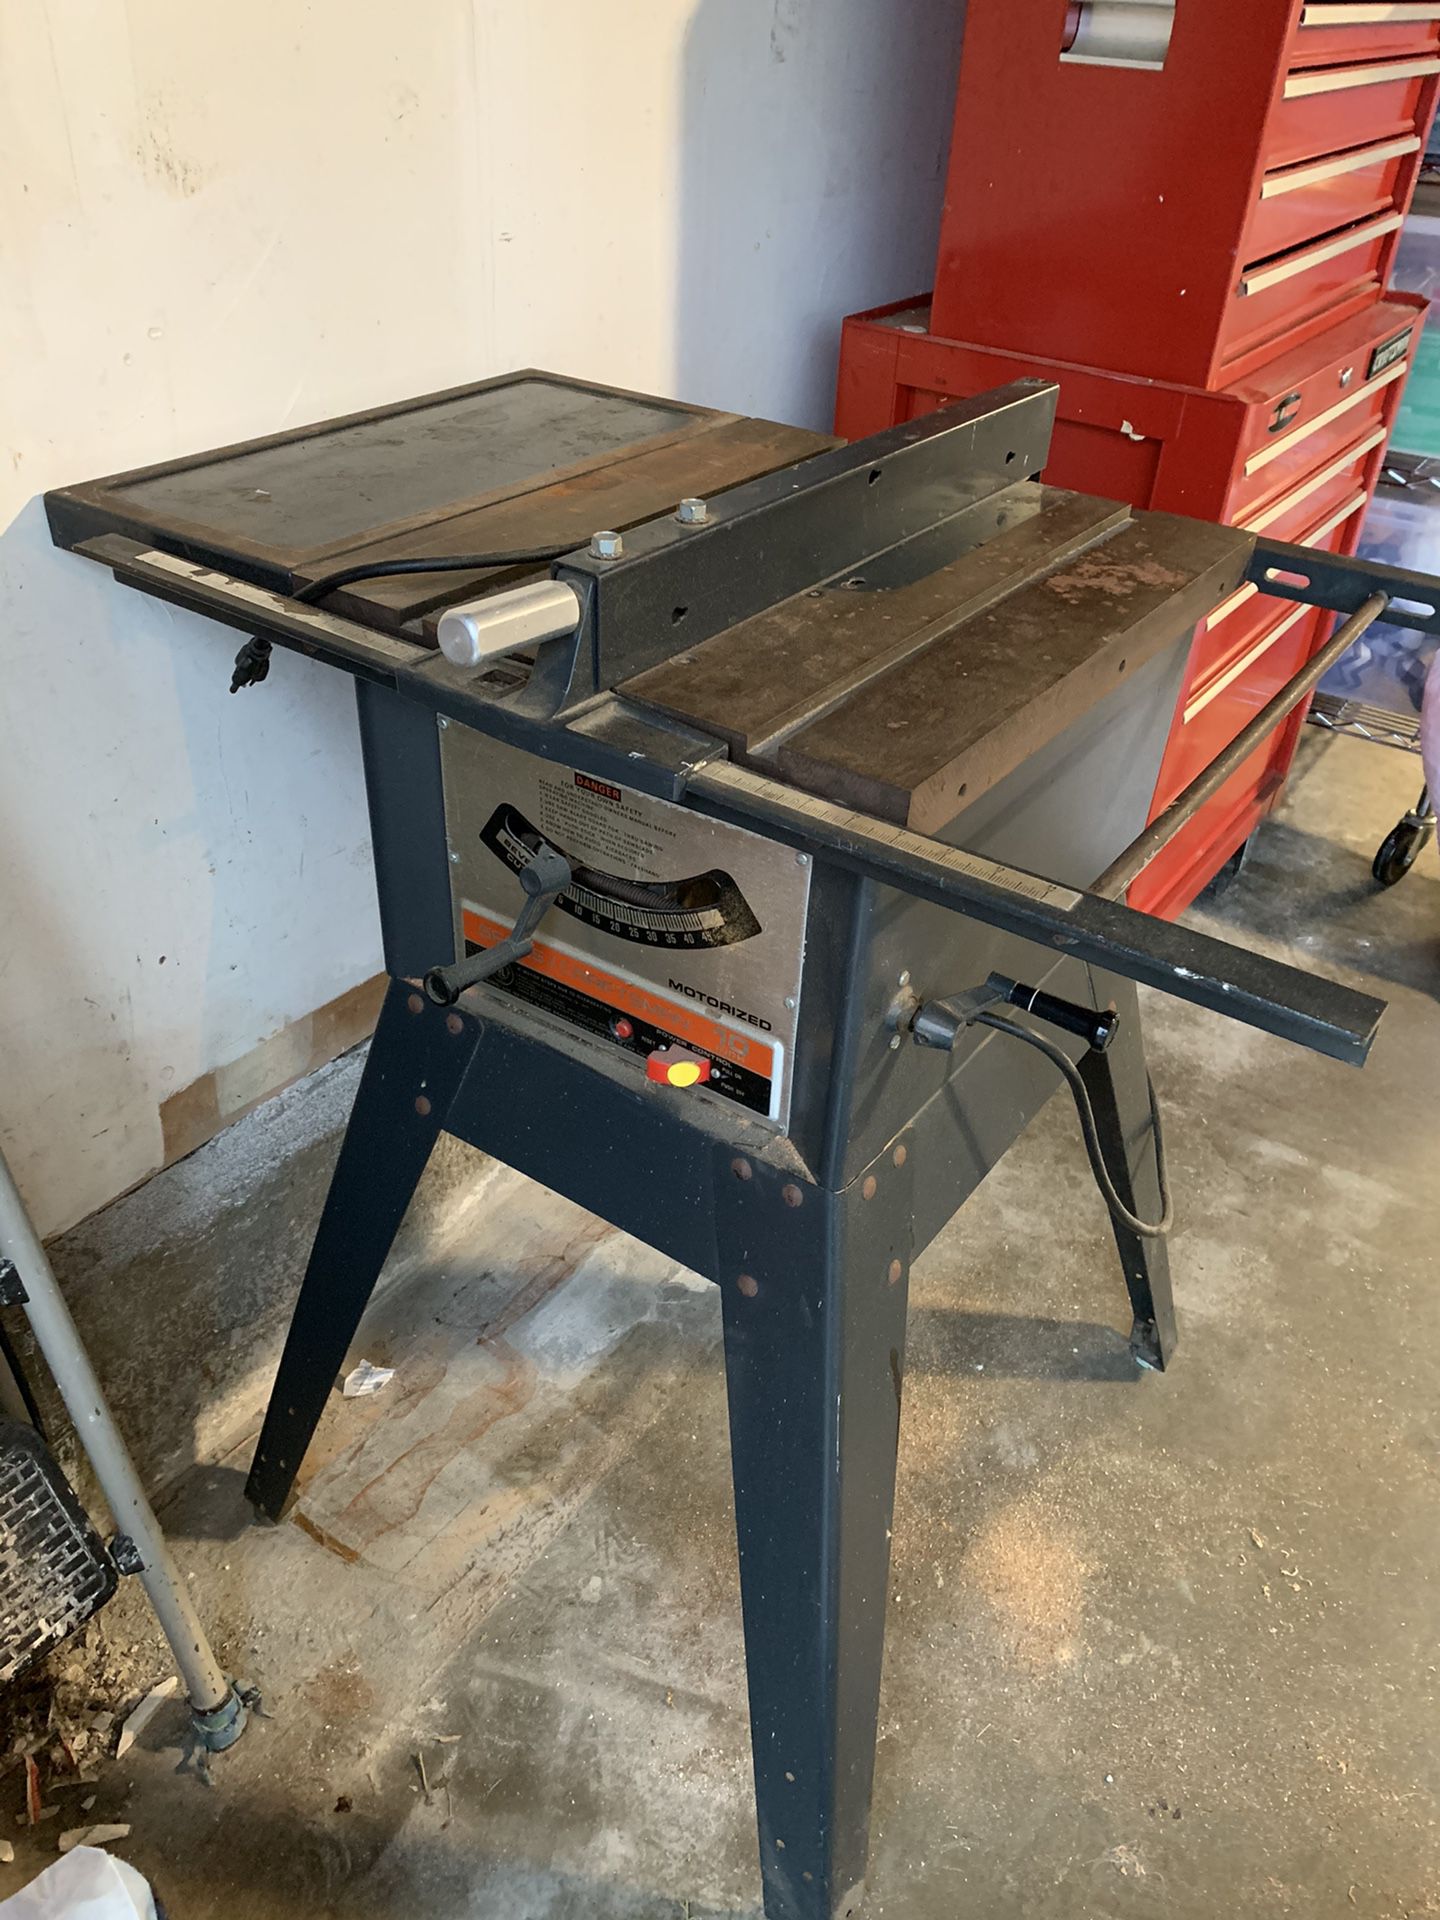 Table saw for sale!